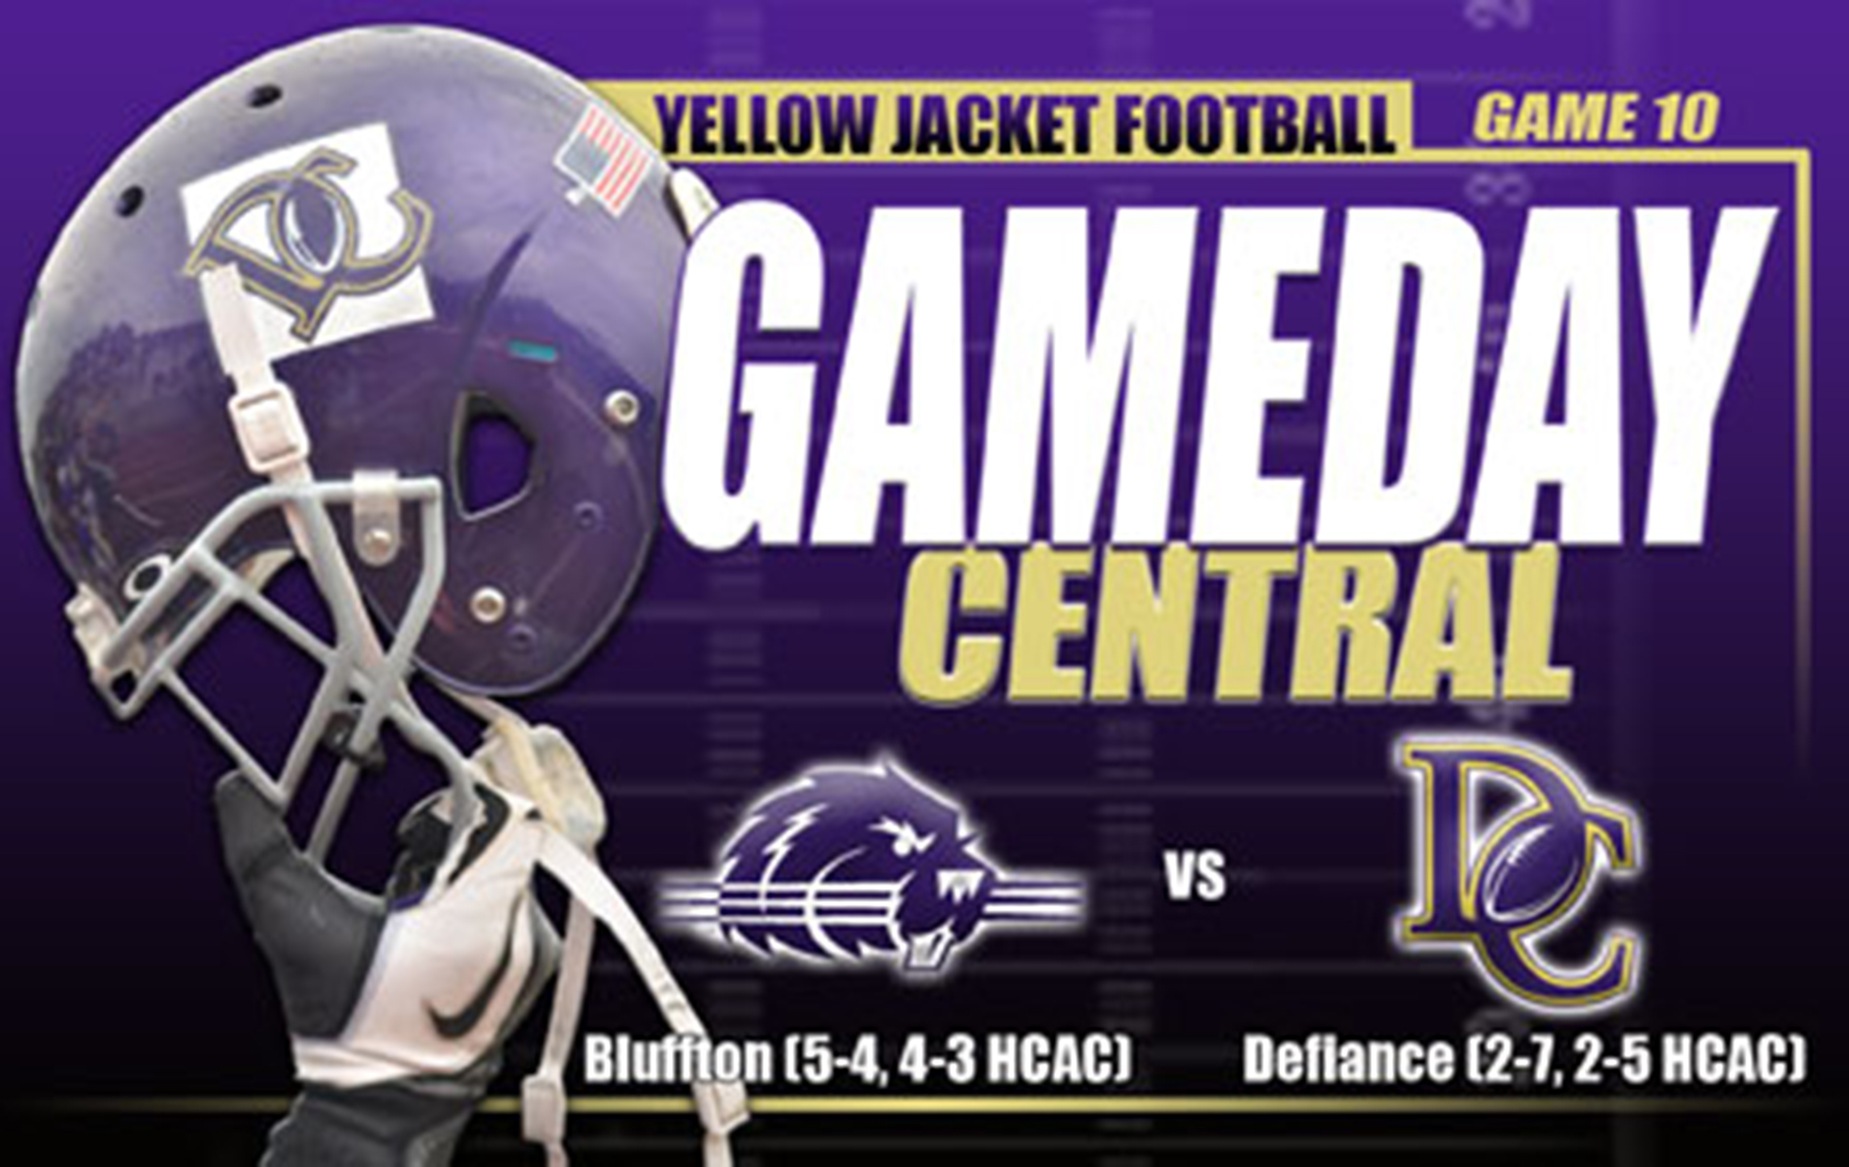 GAMEDAY CENTRAL - Defiance at Bluffton - Game Ten